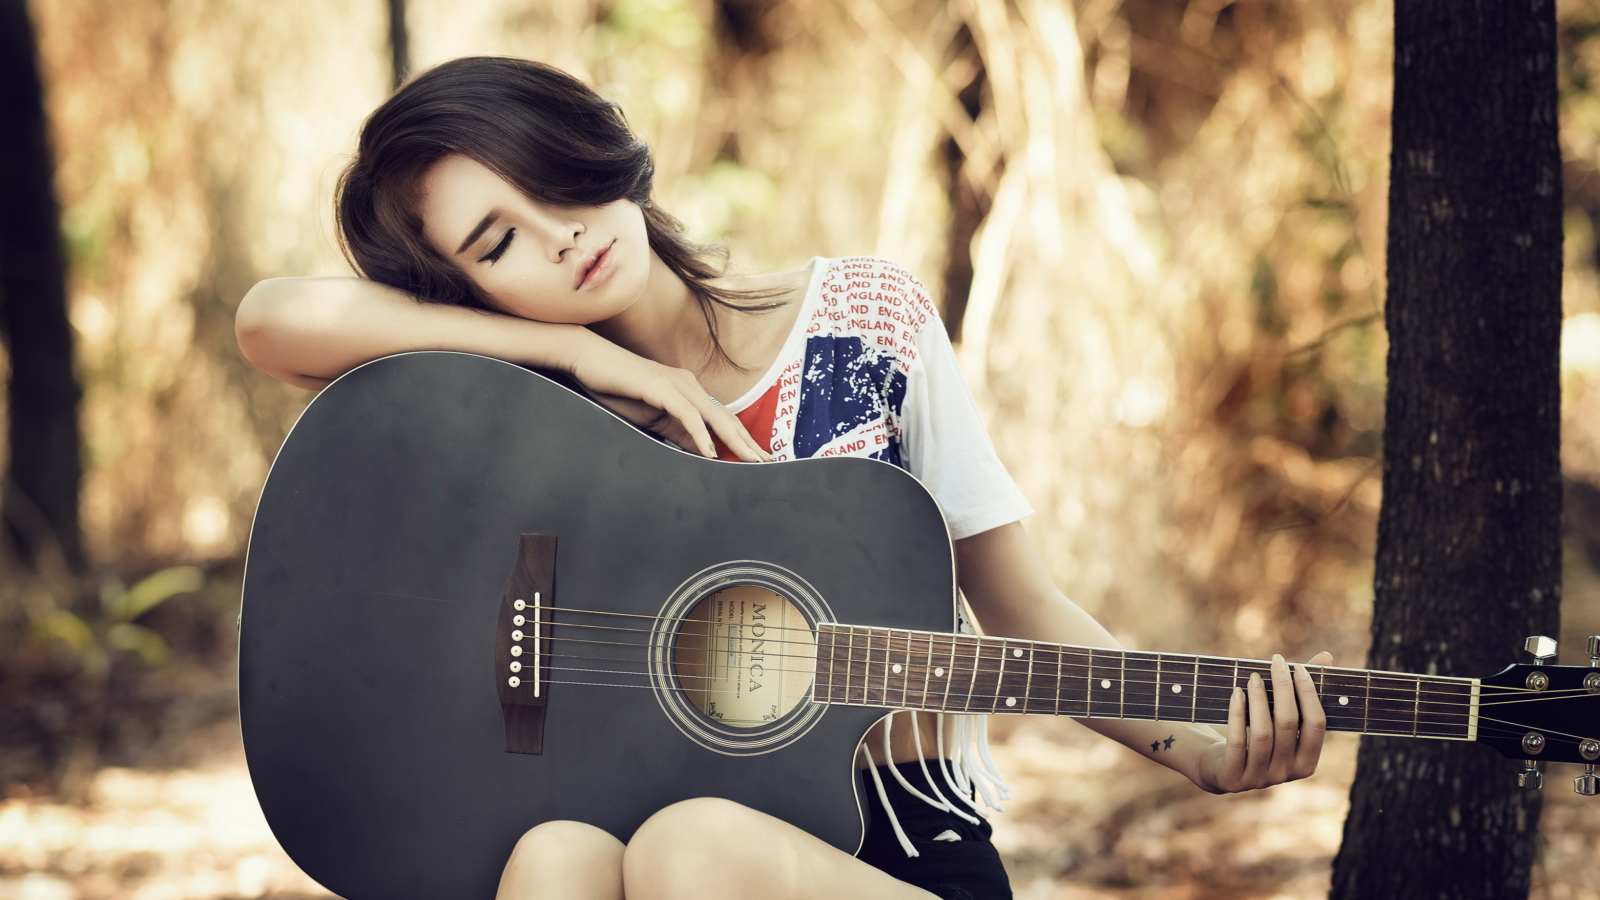 Pretty Girl With Guitar wallpaper 1600x900